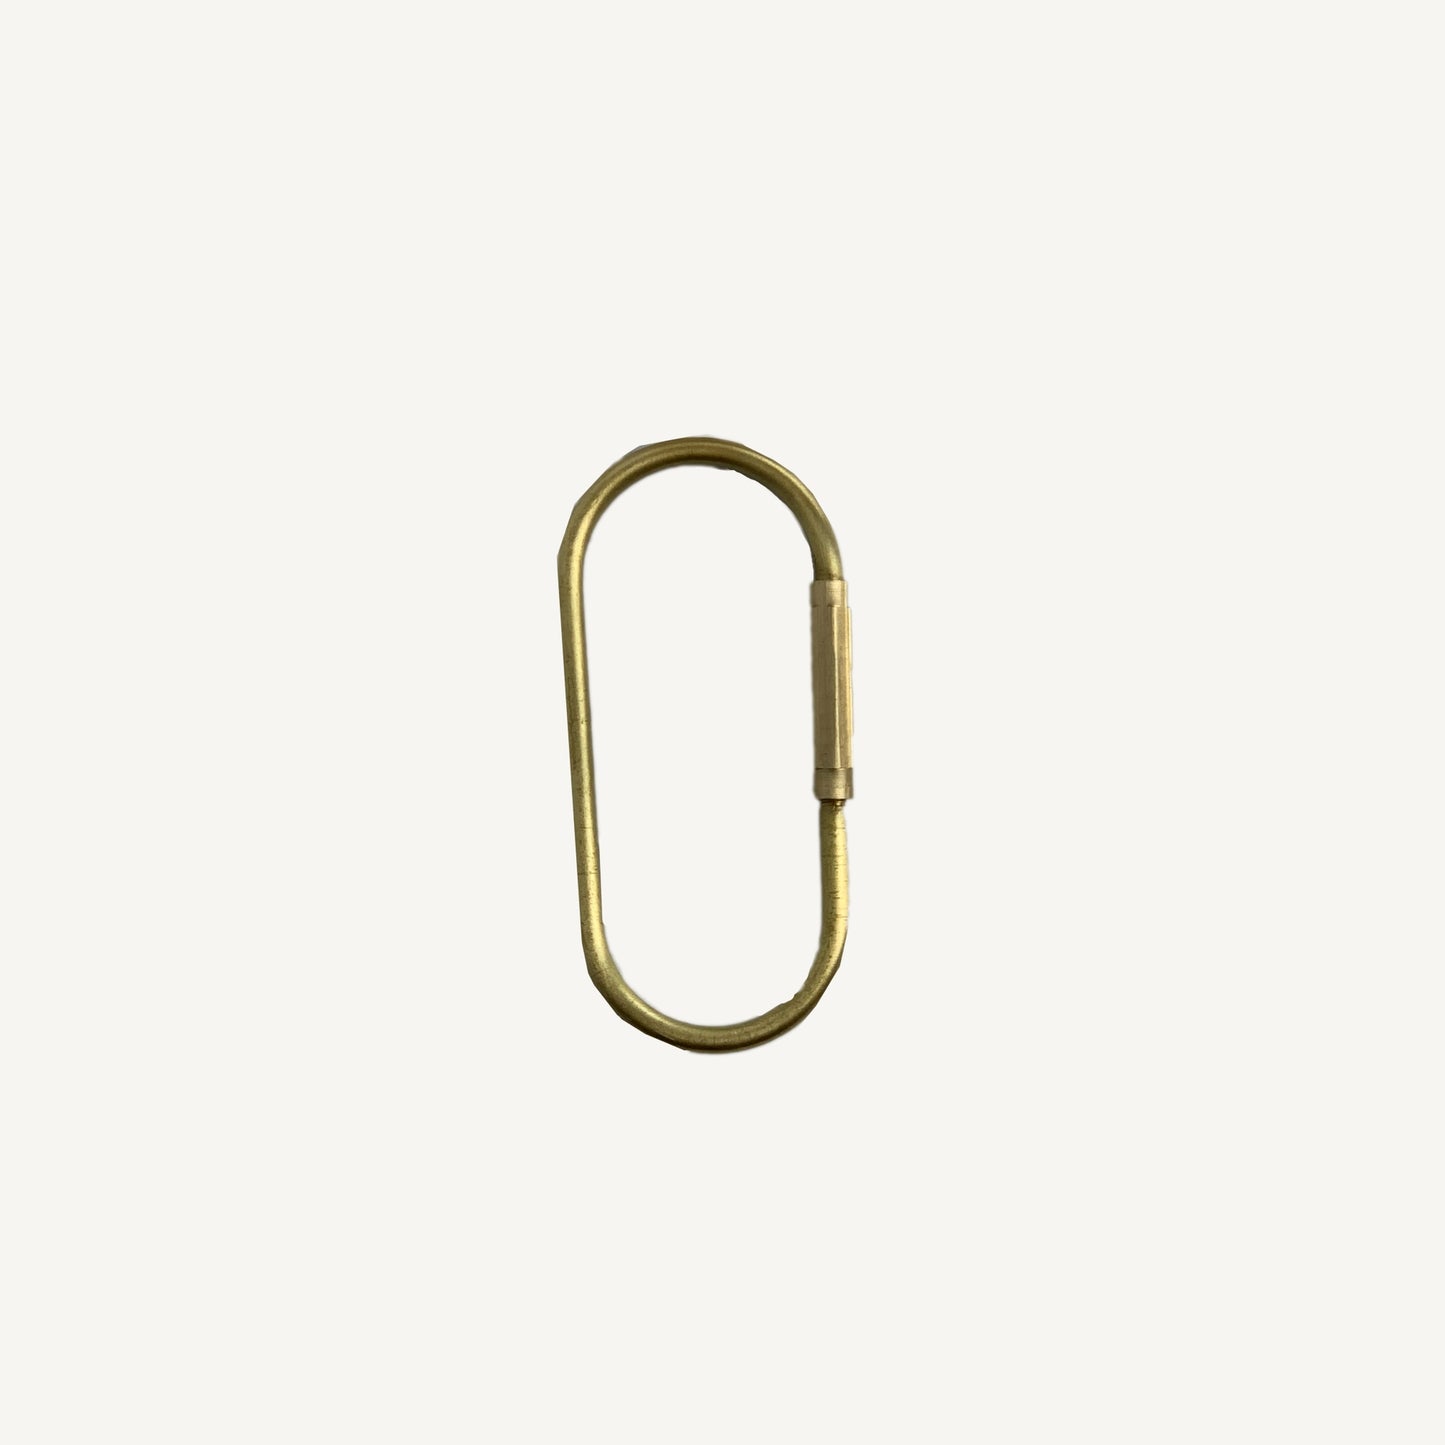 Brass Oval Key Ring with Release